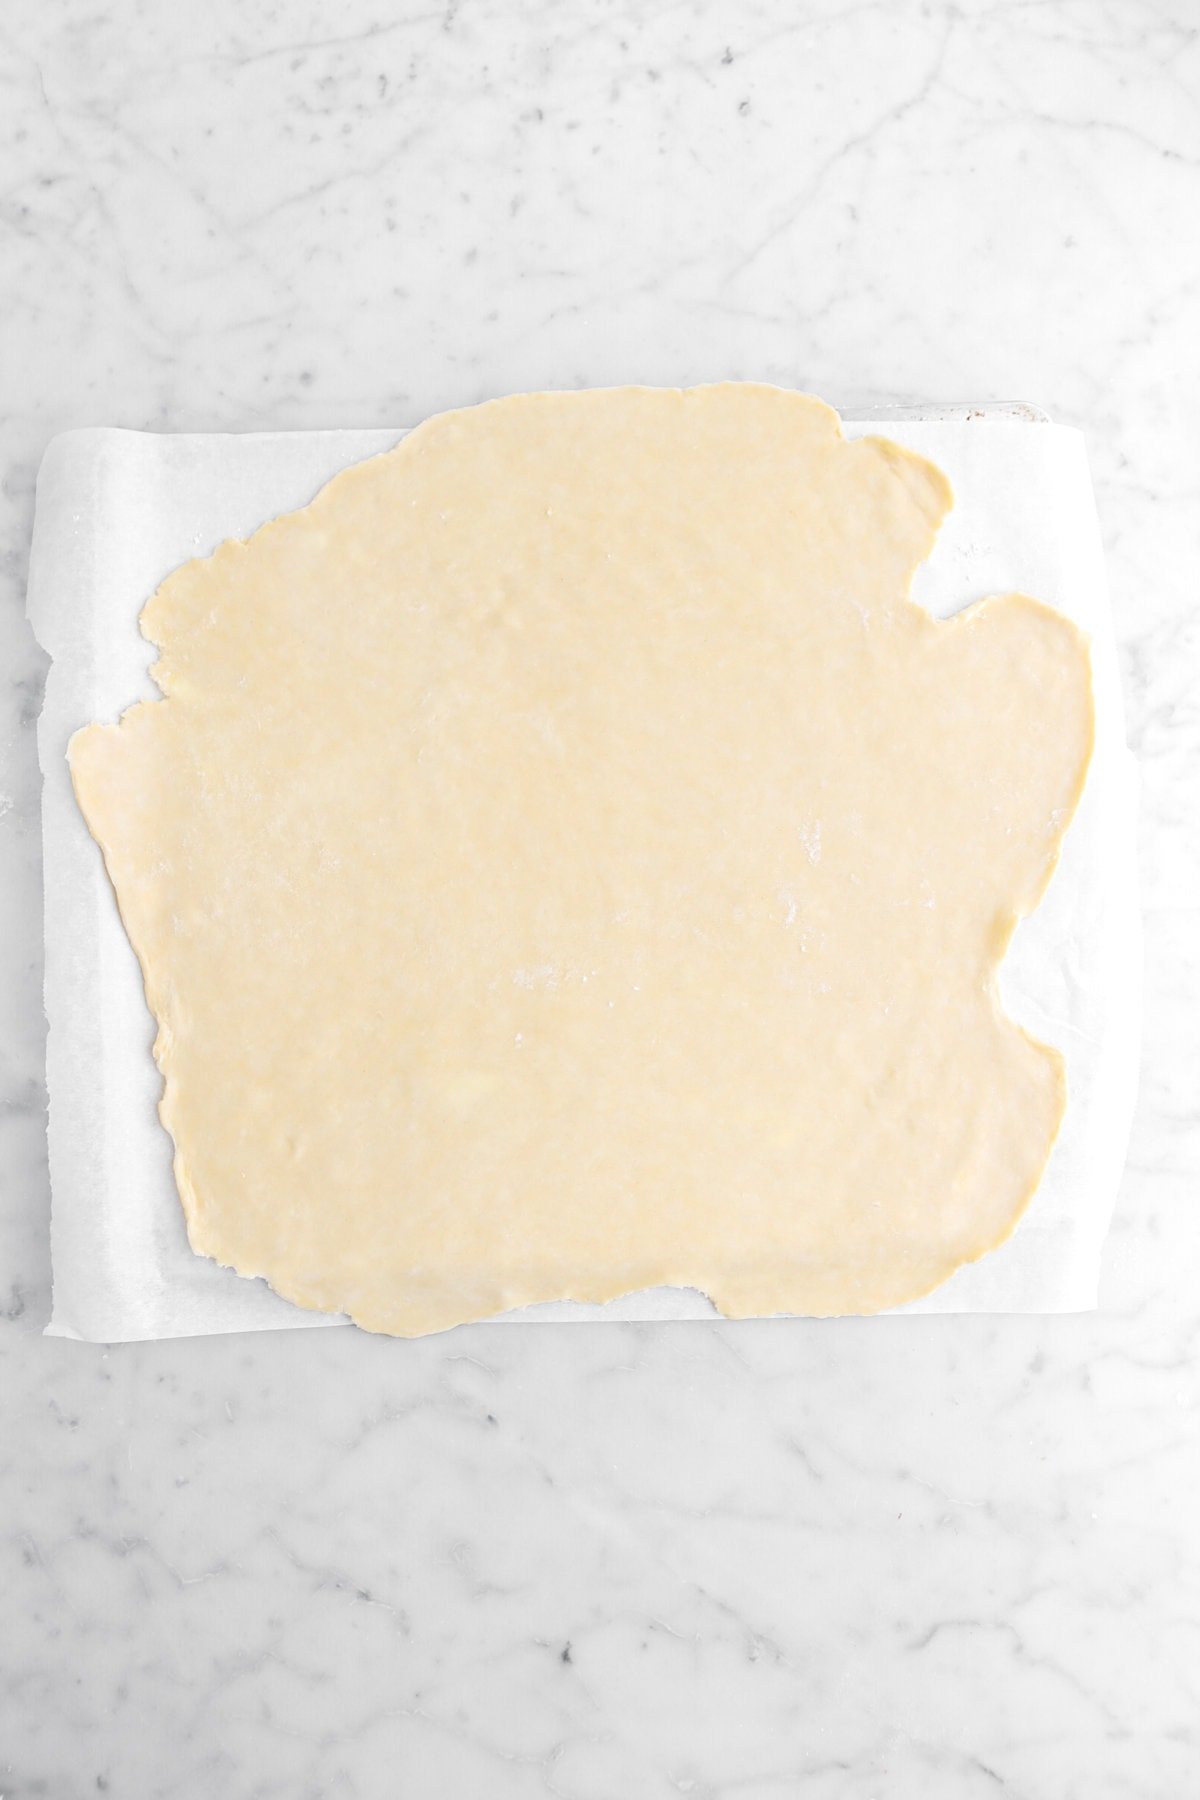 rolled out pie dough on parchment paper.